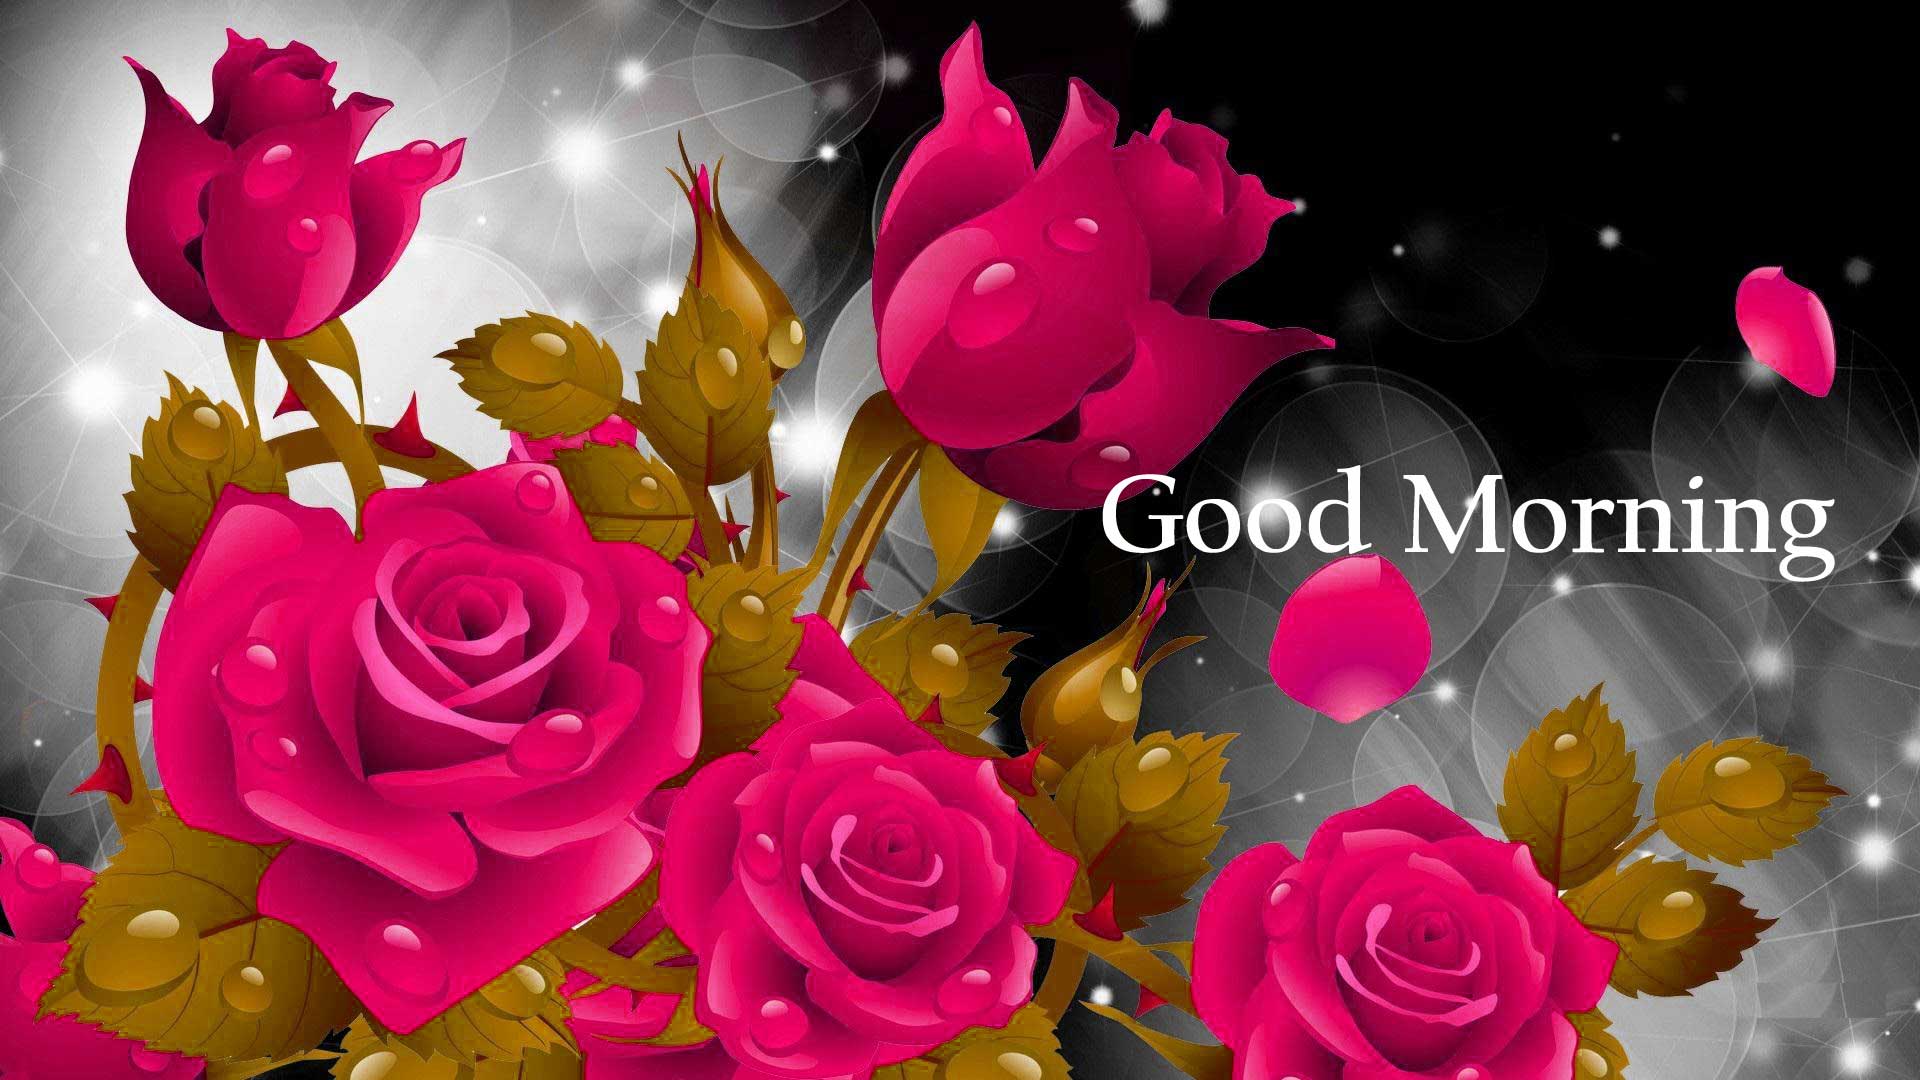 Good Morning Flowers Image Photo Pics HD Download Here